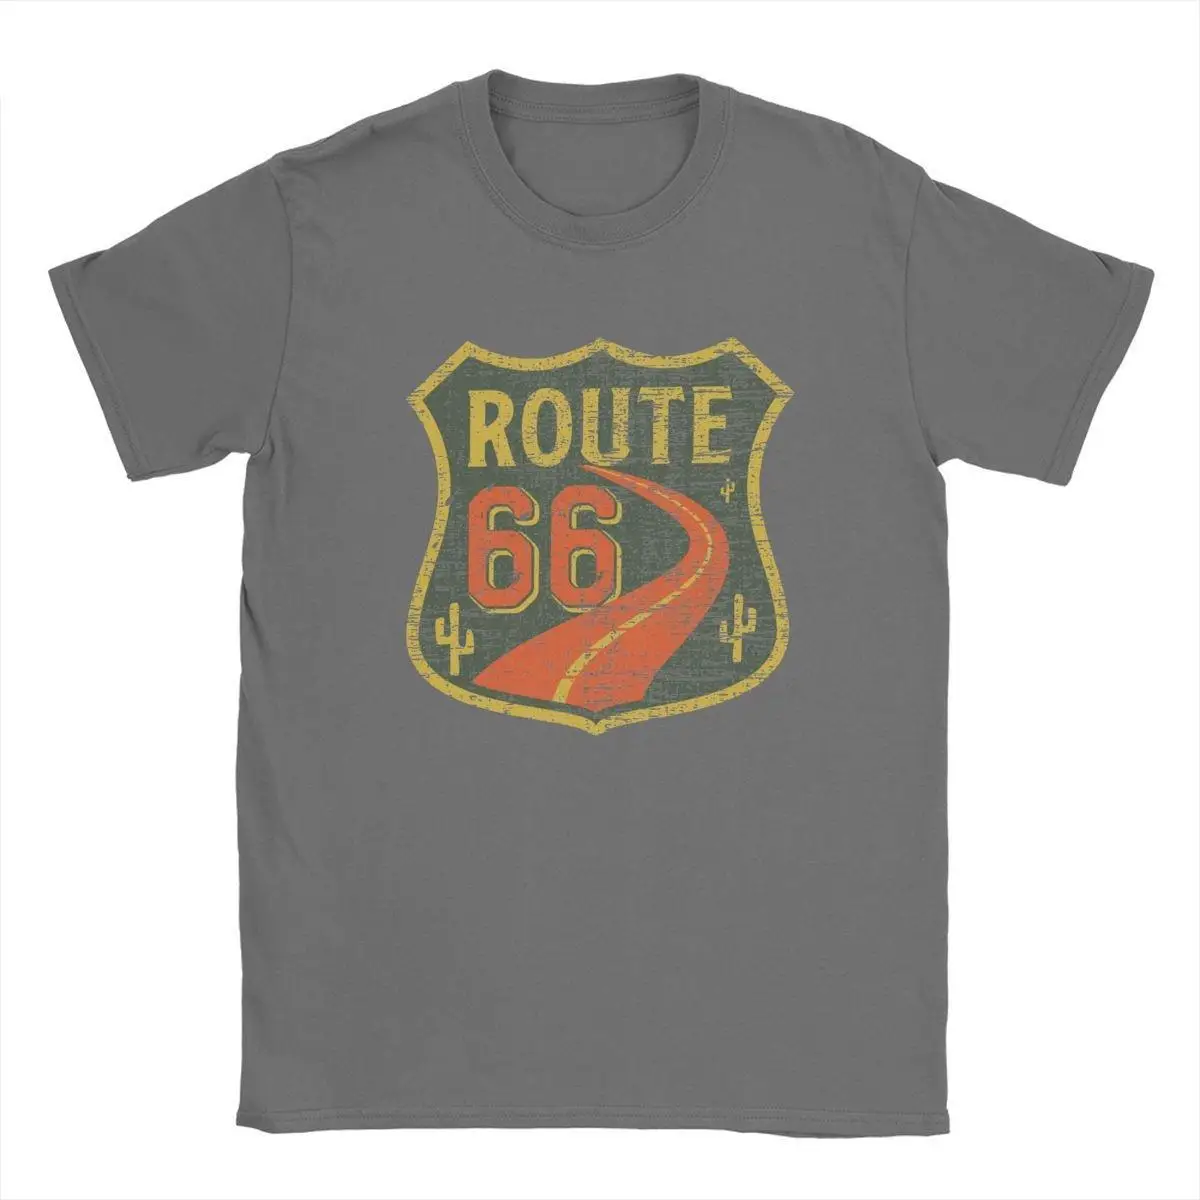 

Novelty Vintage Historic Route 66 Highway T-Shirt Men Round Collar Pure Cotton T Shirts Short Sleeve Tees Gift Idea Tops